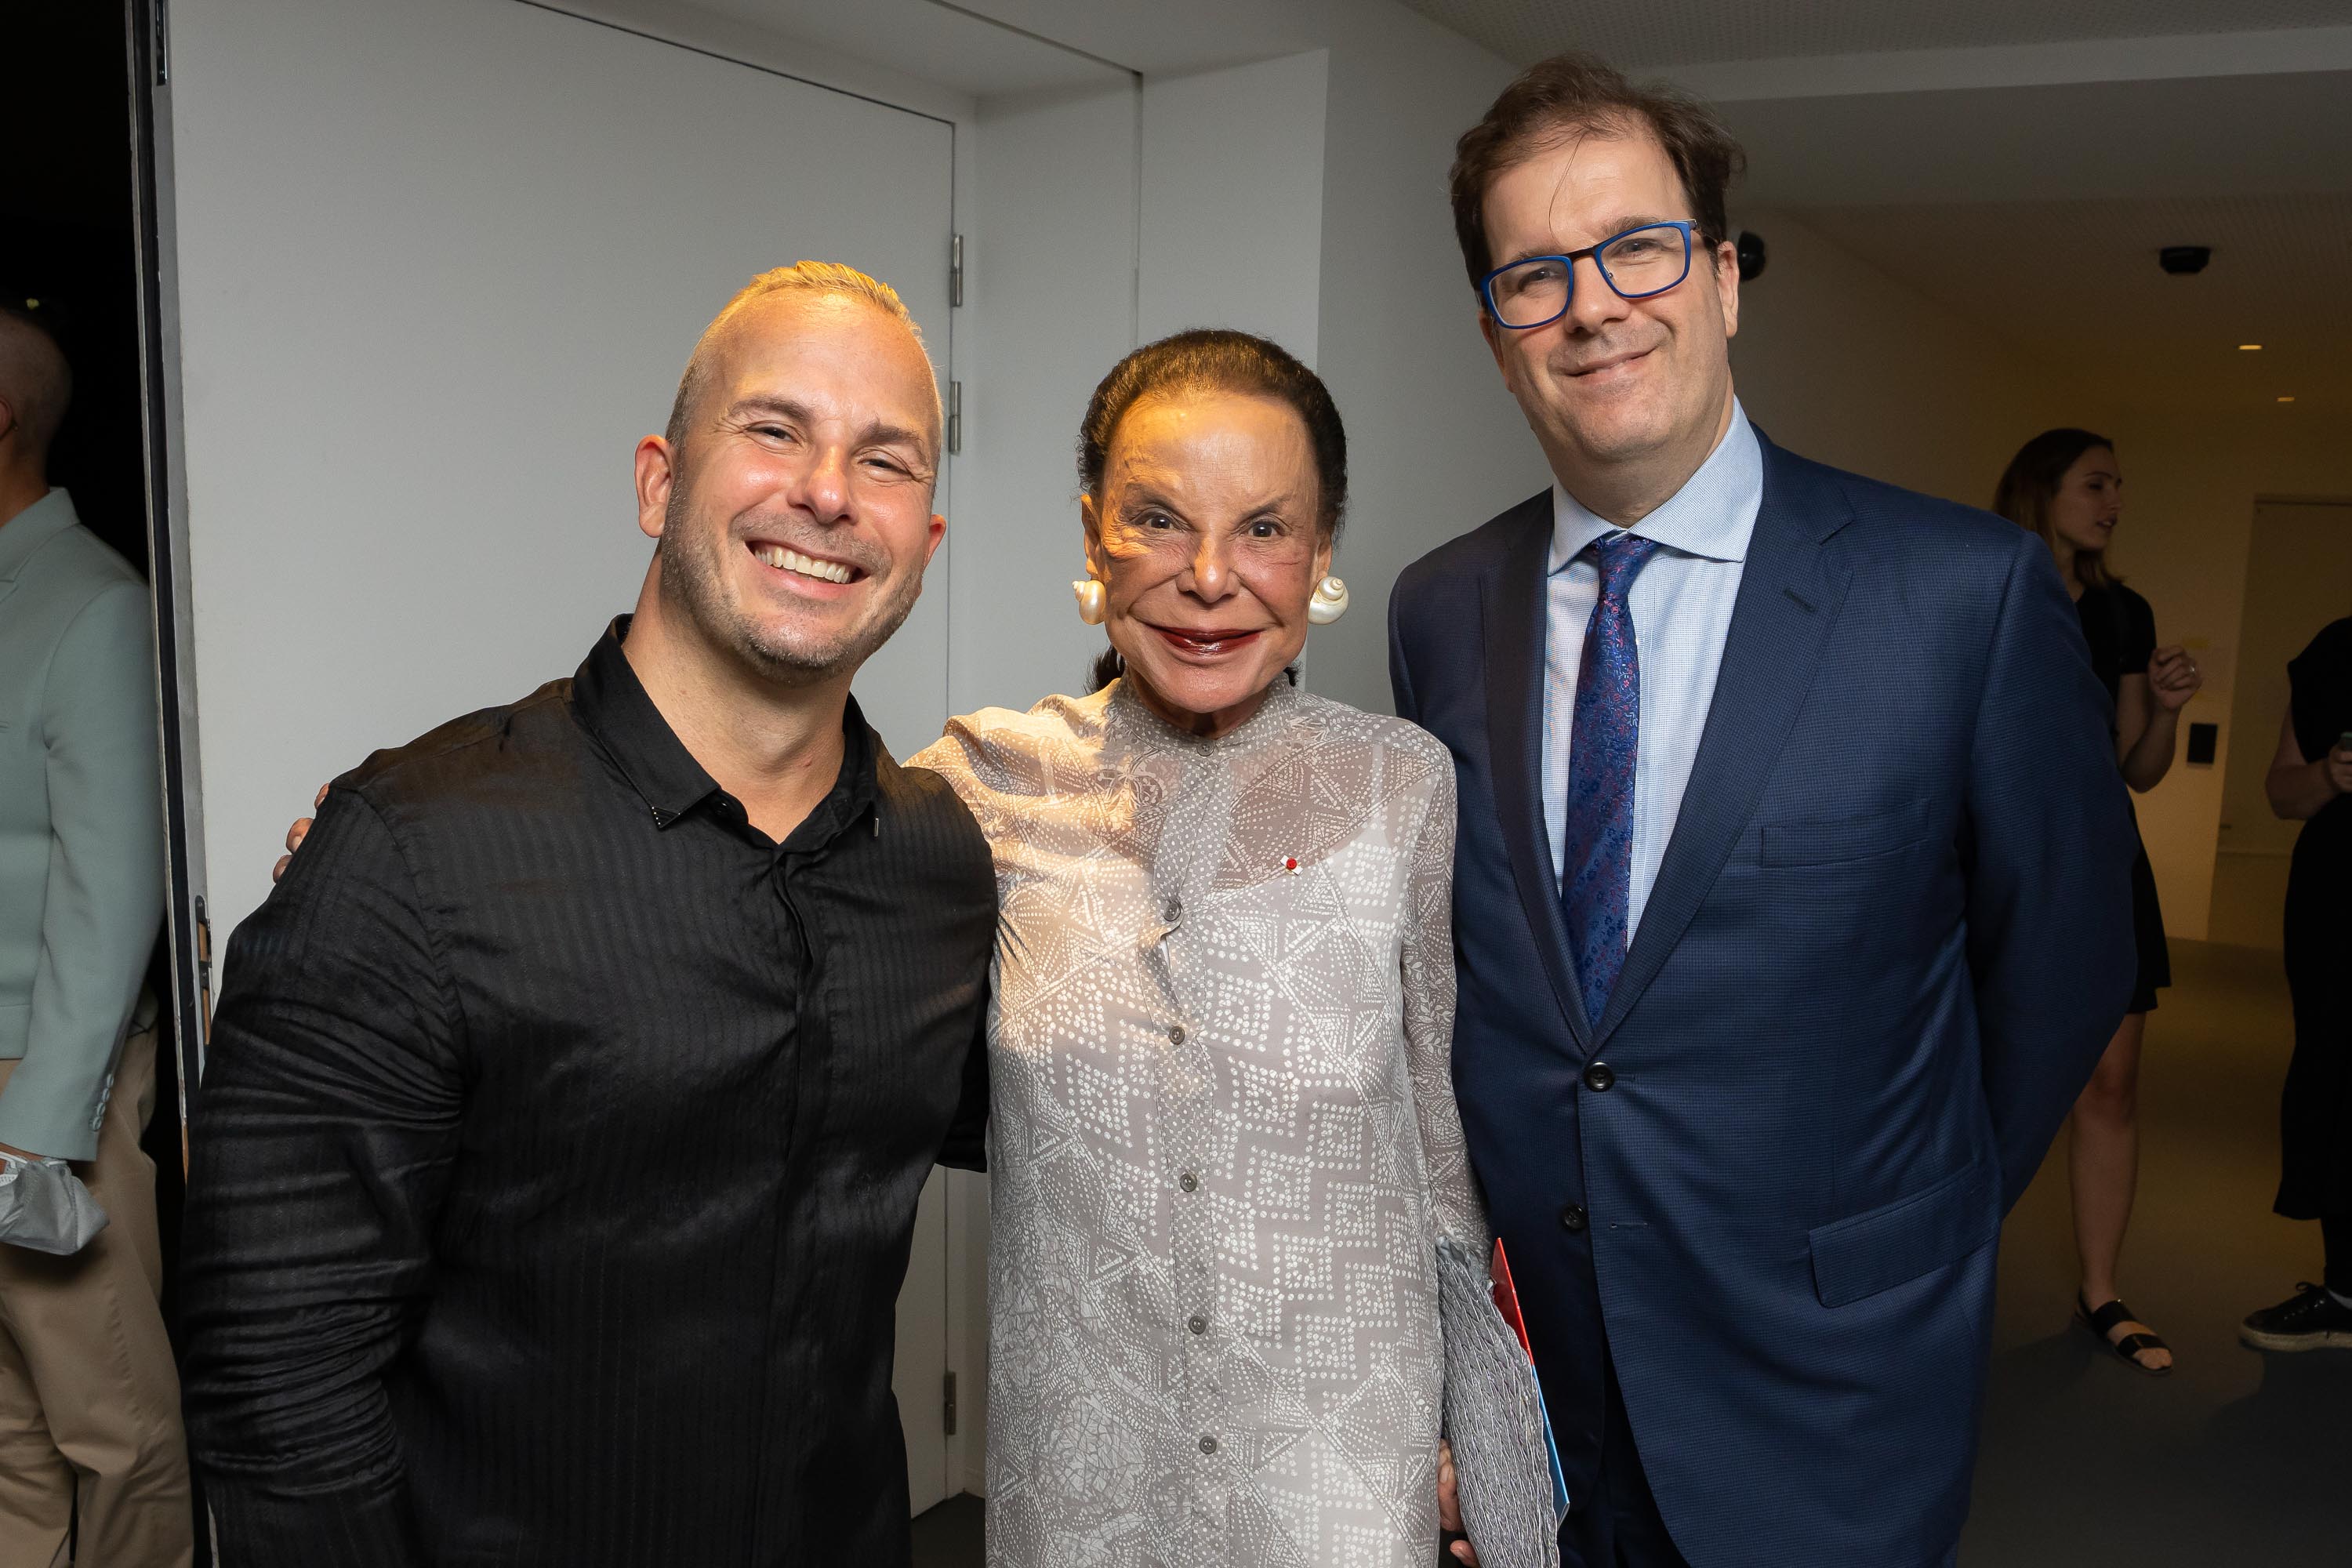 Yannick and Philadelphia Orchestra and Kimmel Center, Inc., President and CEO Matías Tarnopolsky pose backstage with Judith Pisar